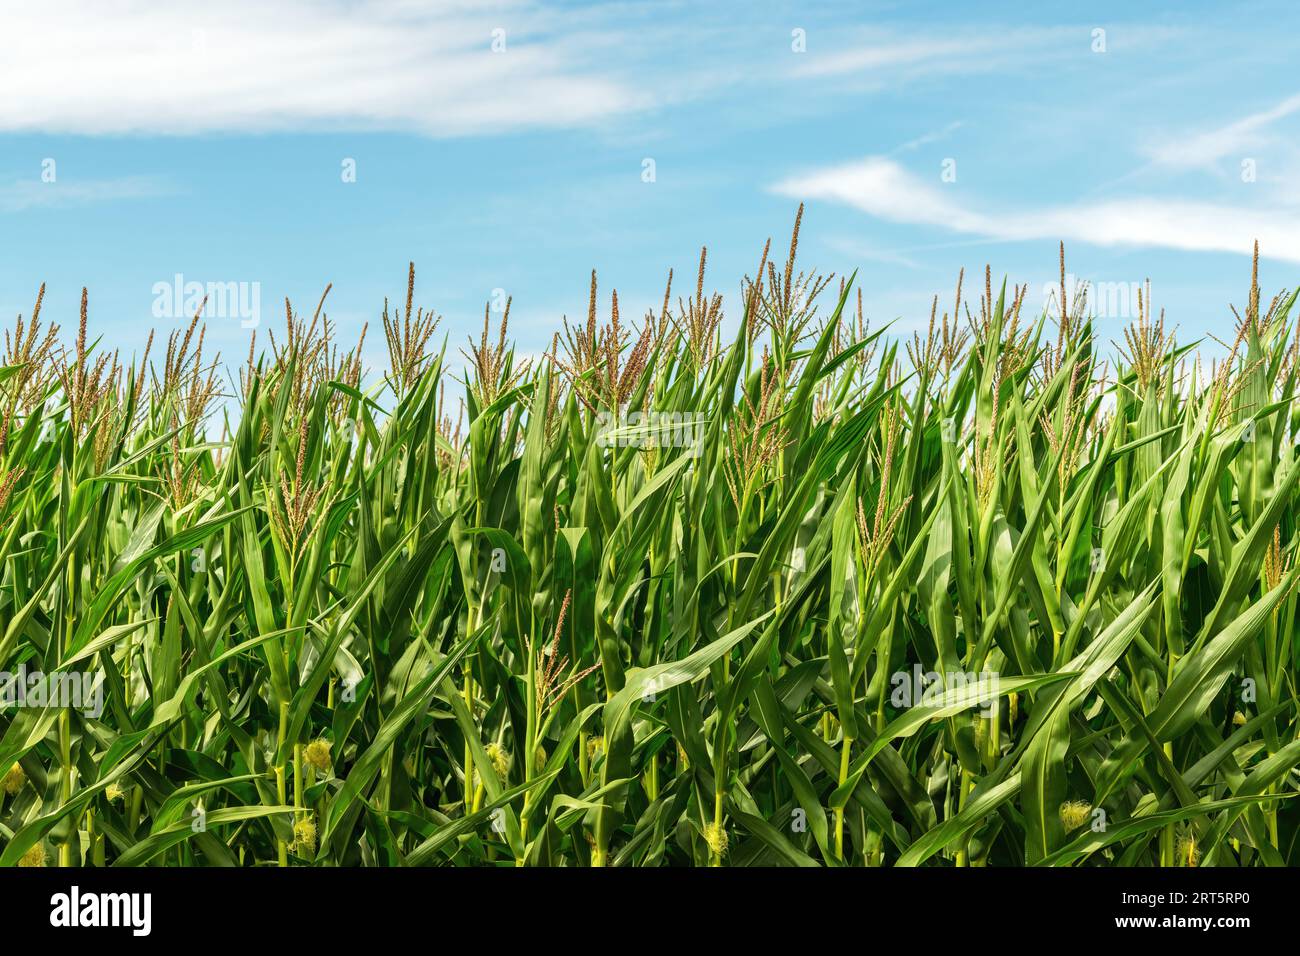 Corn stalks with tassel in cultivated agricultural field, growing organic maize crops, selective focus Stock Photo